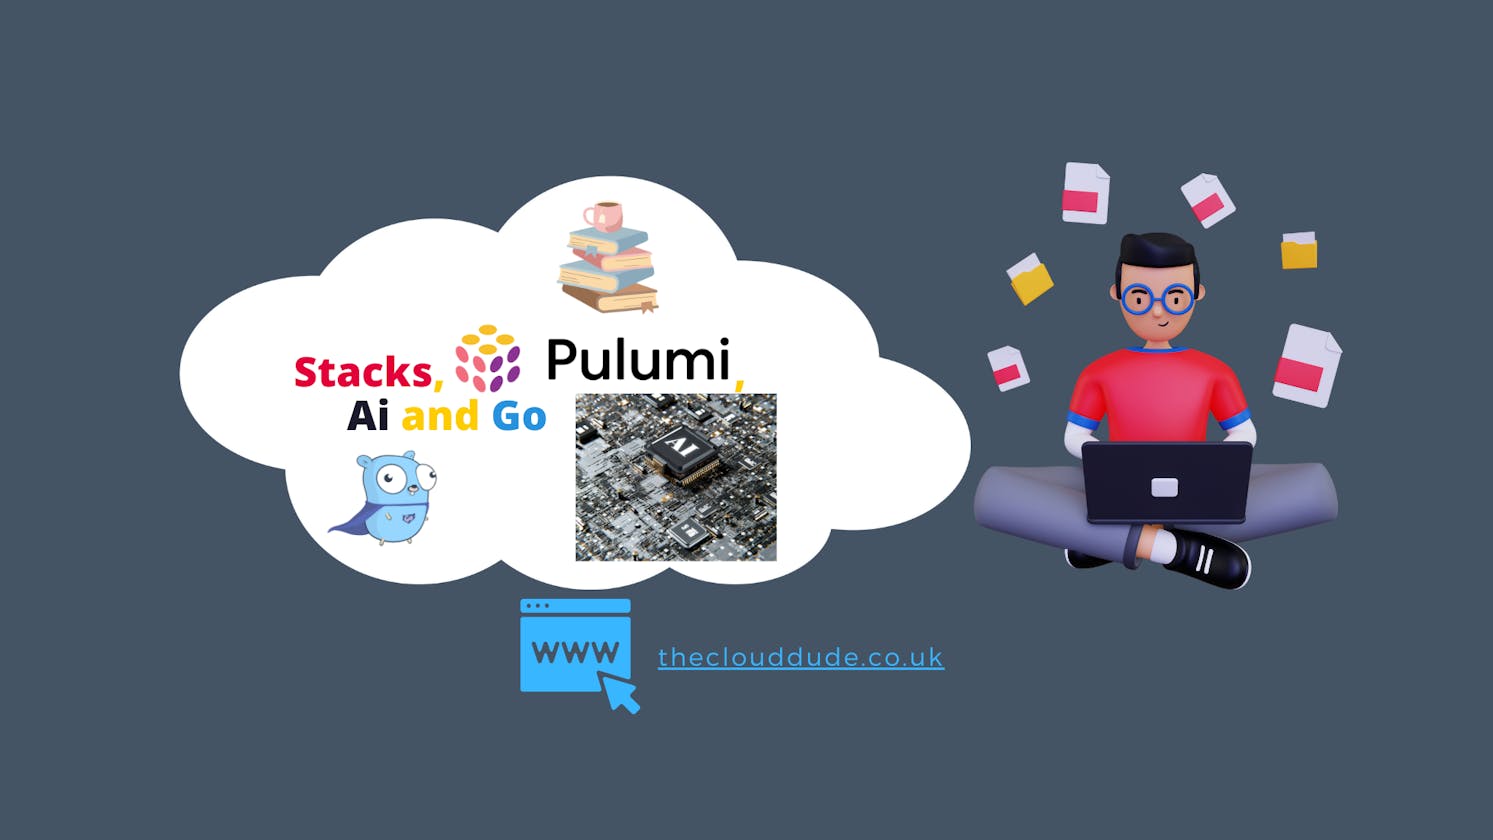 Working with Stacks, AI, Go and Pulumi